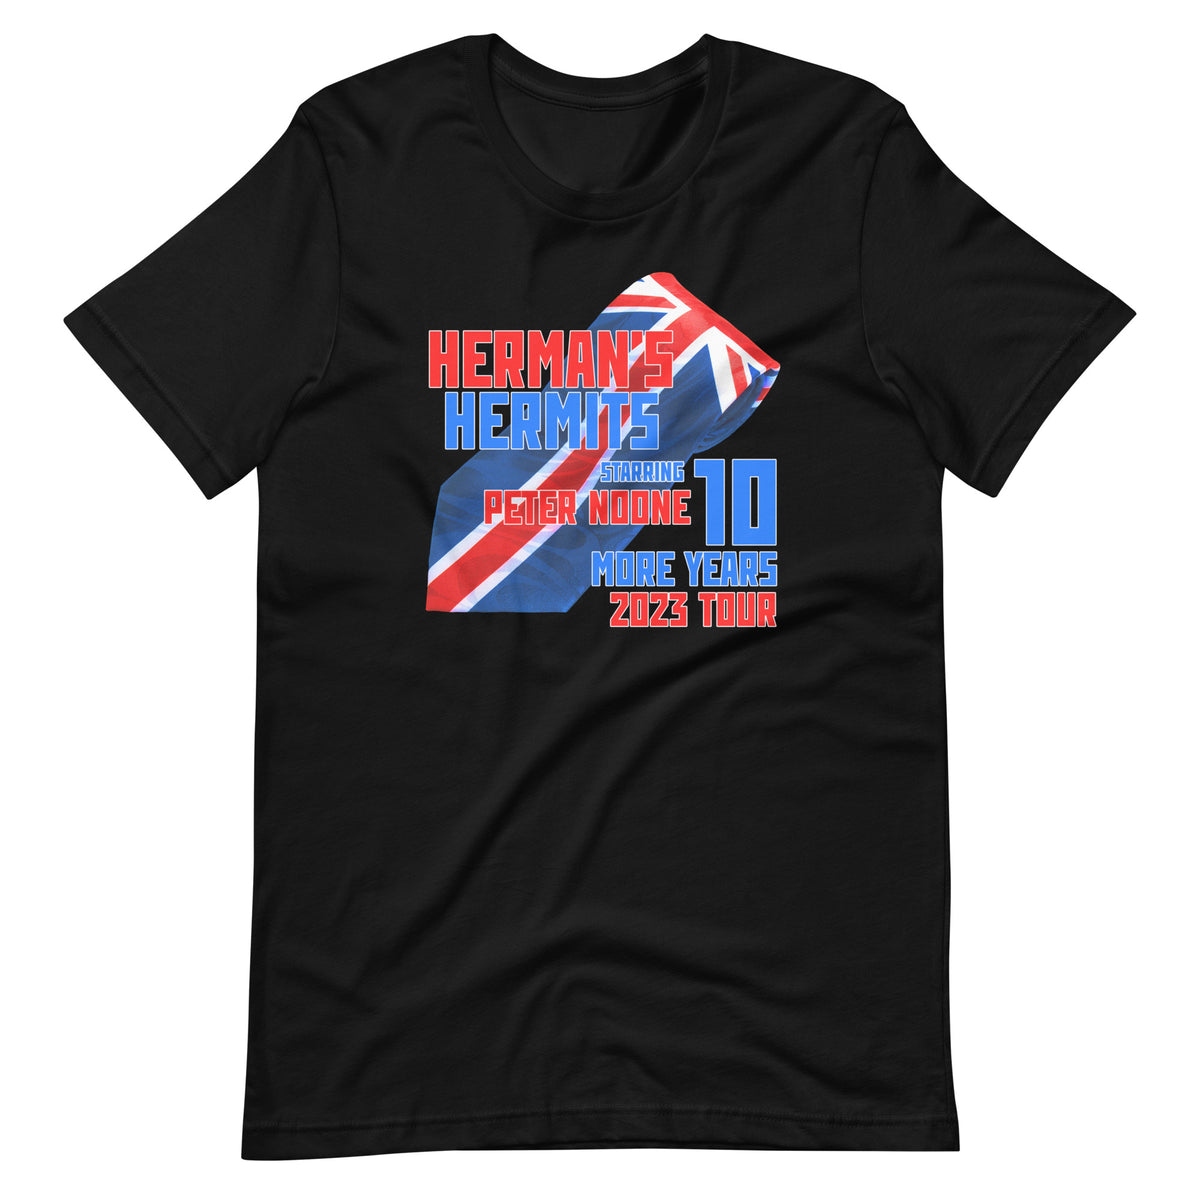 10 MORE YEARS 2023 Tour T-Shirt